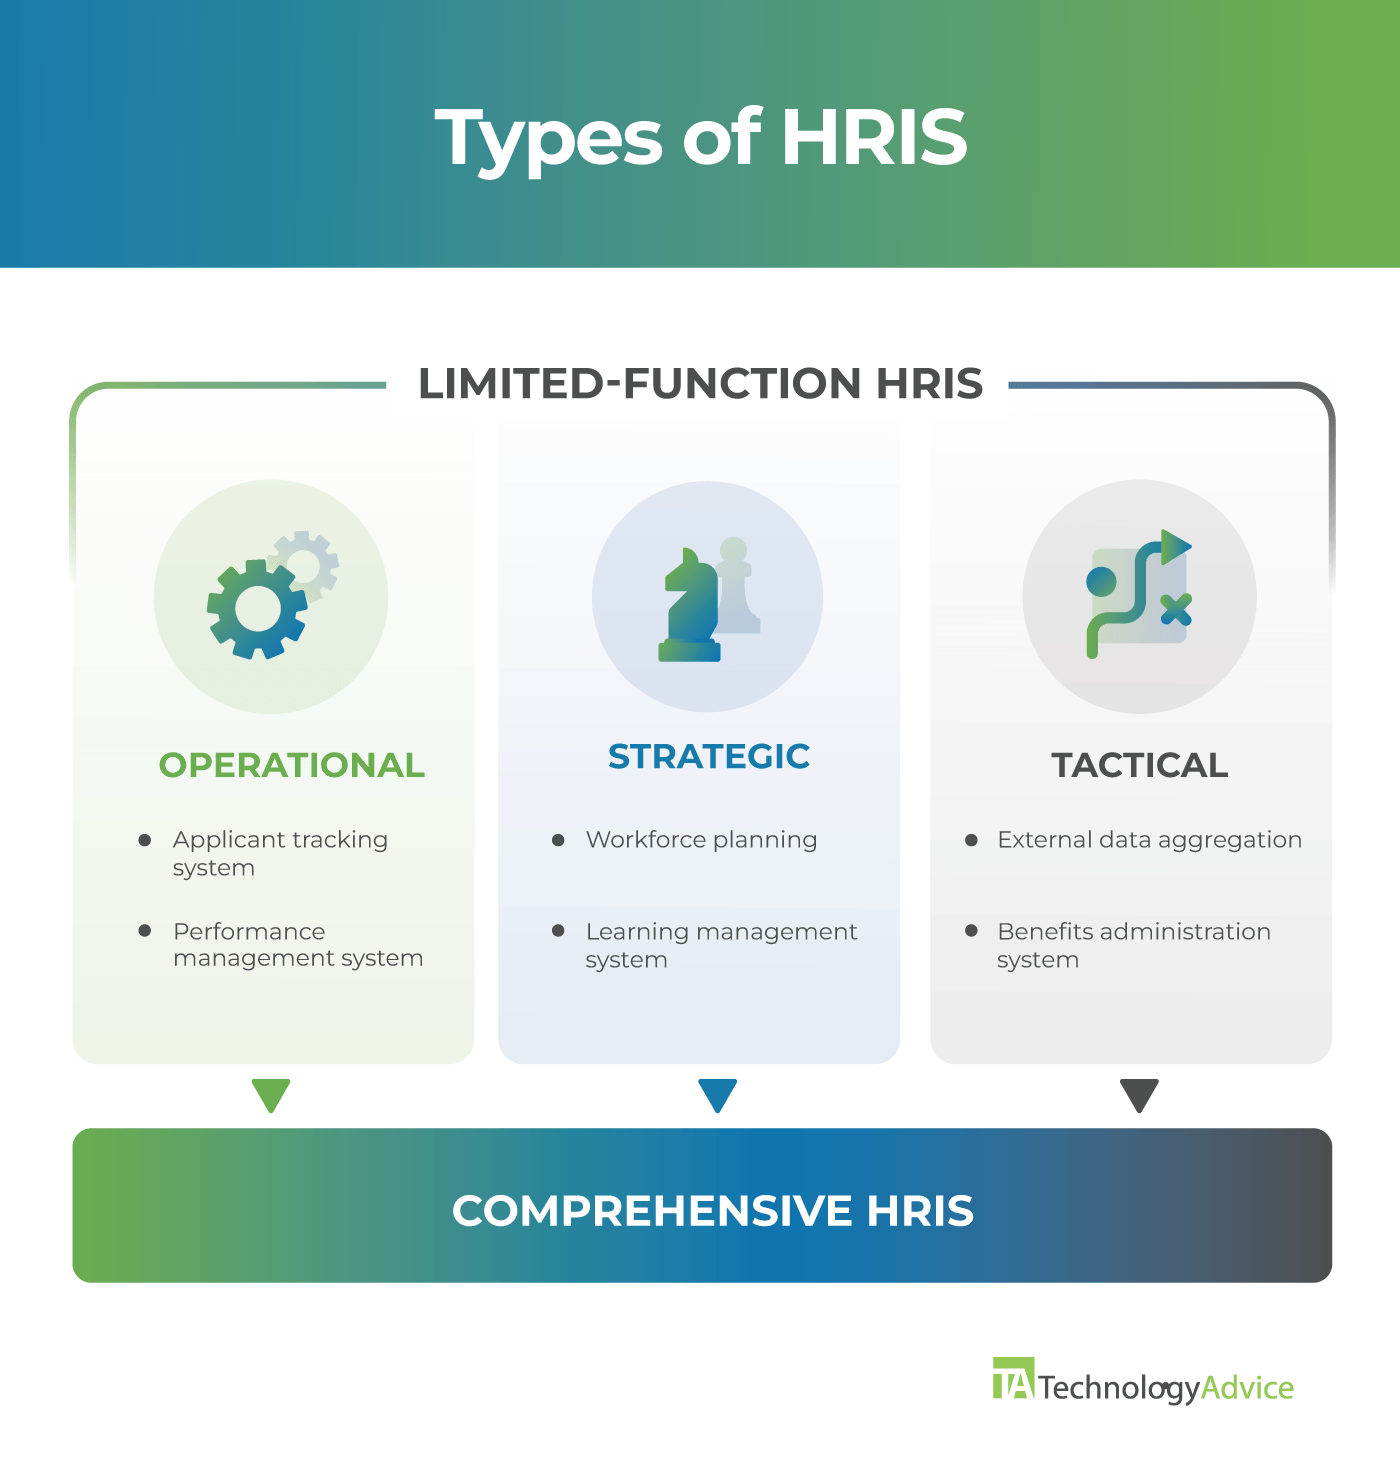 Infographic depicting the different types of HRIS and how they connect to each other.